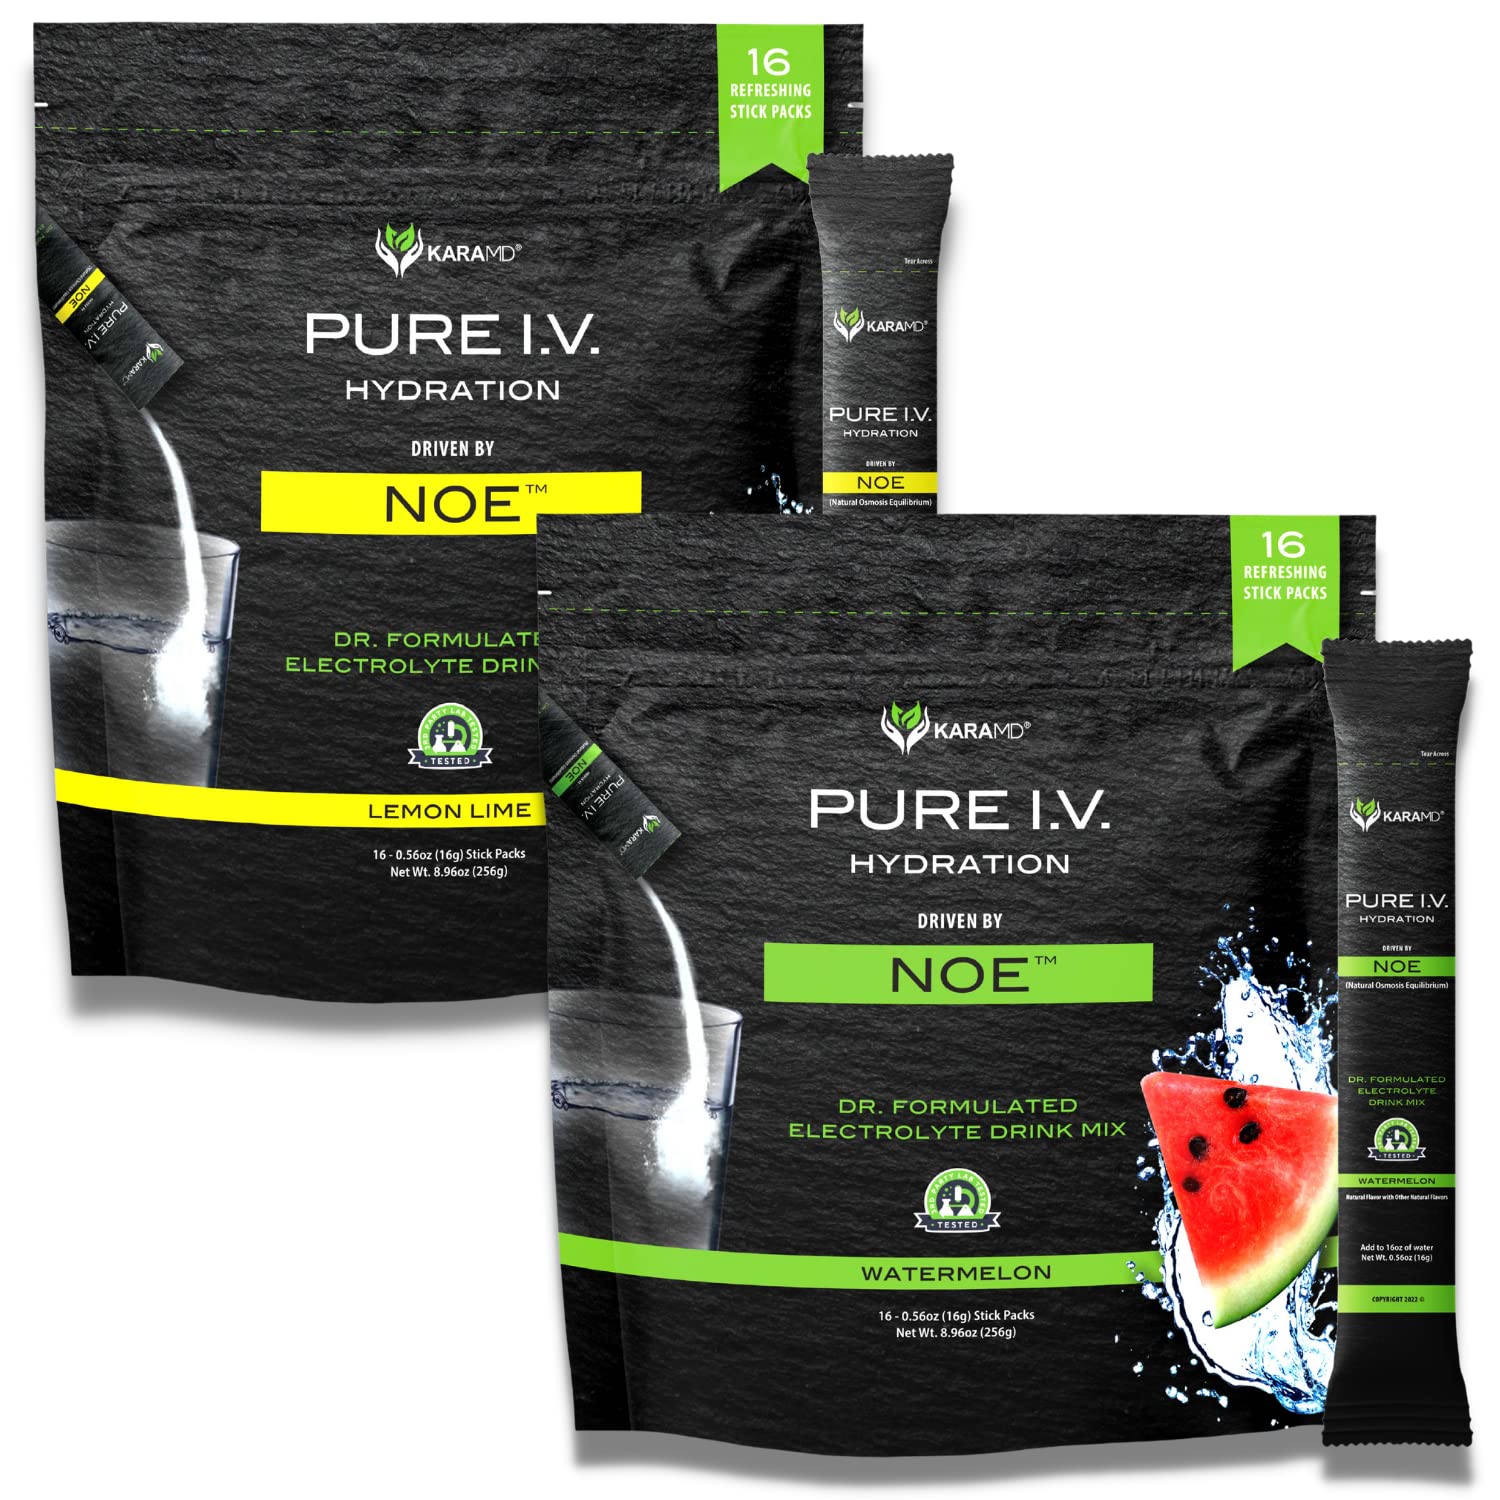 KaraMD Pure I.V. - Doctor Formulated Electrolyte Powder Drink Mix 2 Flavor Bundle ? Refreshing & Delicious Hydrating Packets with Vitamins & Minerals ? 1 Lemon Lime & 1 Watermelon Bag (32 Sticks)